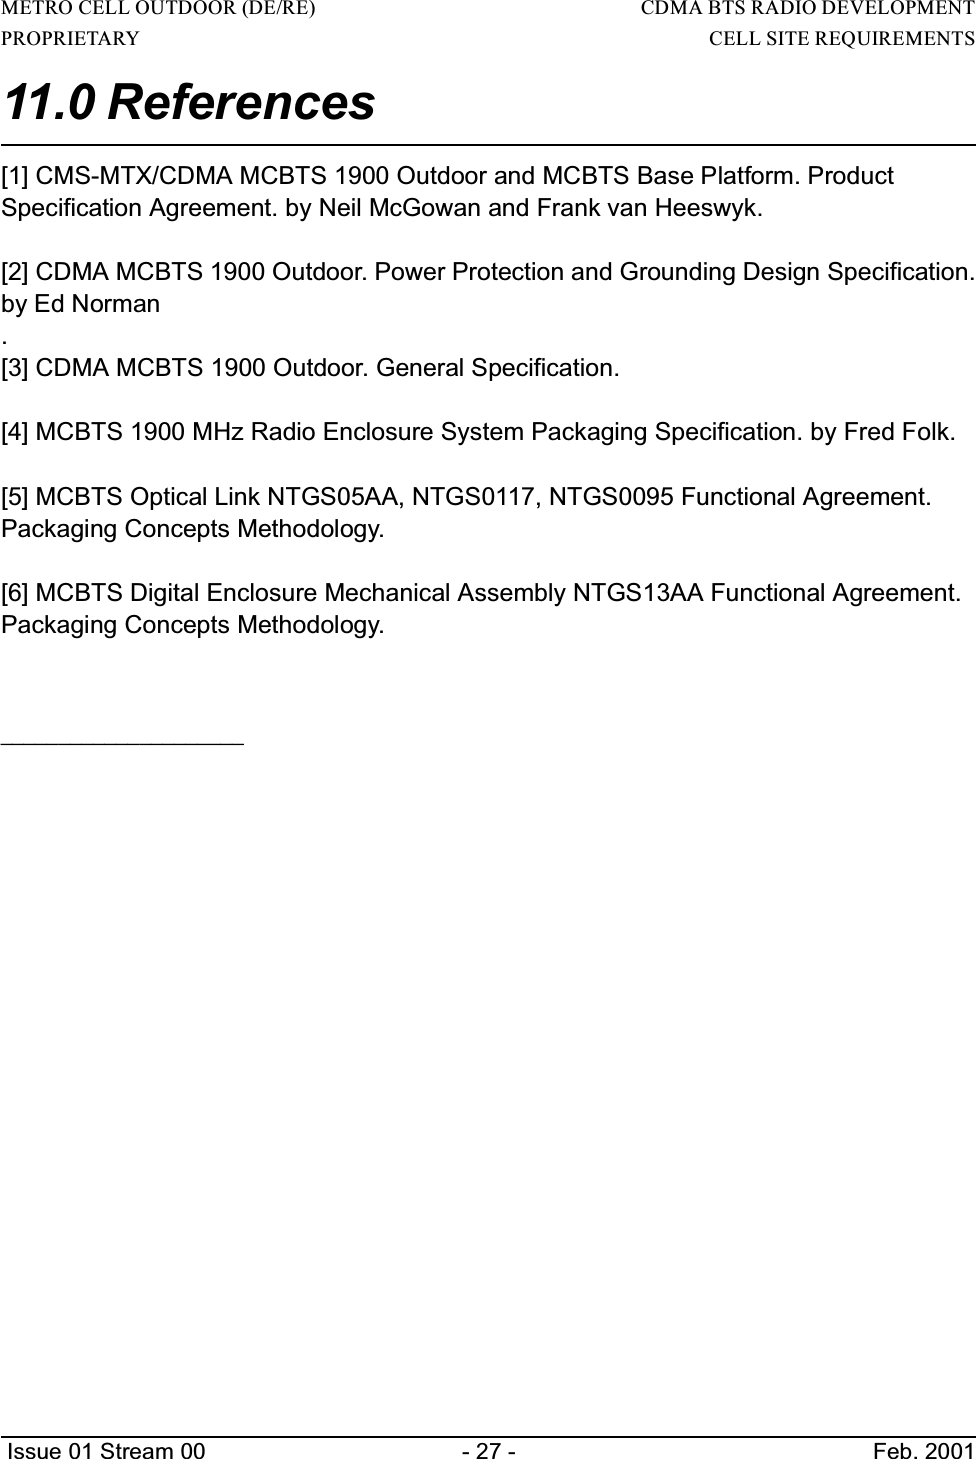 METRO CELL OUTDOOR (DE/RE)                                                                     CDMA BTS RADIO DEVELOPMENTPROPRIETARY                                                                                                                        CELL SITE REQUIREMENTS Issue 01 Stream 00 - 27 - Feb. 200111.0 References [1] CMS-MTX/CDMA MCBTS 1900 Outdoor and MCBTS Base Platform. ProductSpecification Agreement. by Neil McGowan and Frank van Heeswyk.[2] CDMA MCBTS 1900 Outdoor. Power Protection and Grounding Design Specification.by Ed Norman.[3] CDMA MCBTS 1900 Outdoor. General Specification.[4] MCBTS 1900 MHz Radio Enclosure System Packaging Specification. by Fred Folk.[5] MCBTS Optical Link NTGS05AA, NTGS0117, NTGS0095 Functional Agreement.Packaging Concepts Methodology.[6] MCBTS Digital Enclosure Mechanical Assembly NTGS13AA Functional Agreement.Packaging Concepts Methodology._____________________